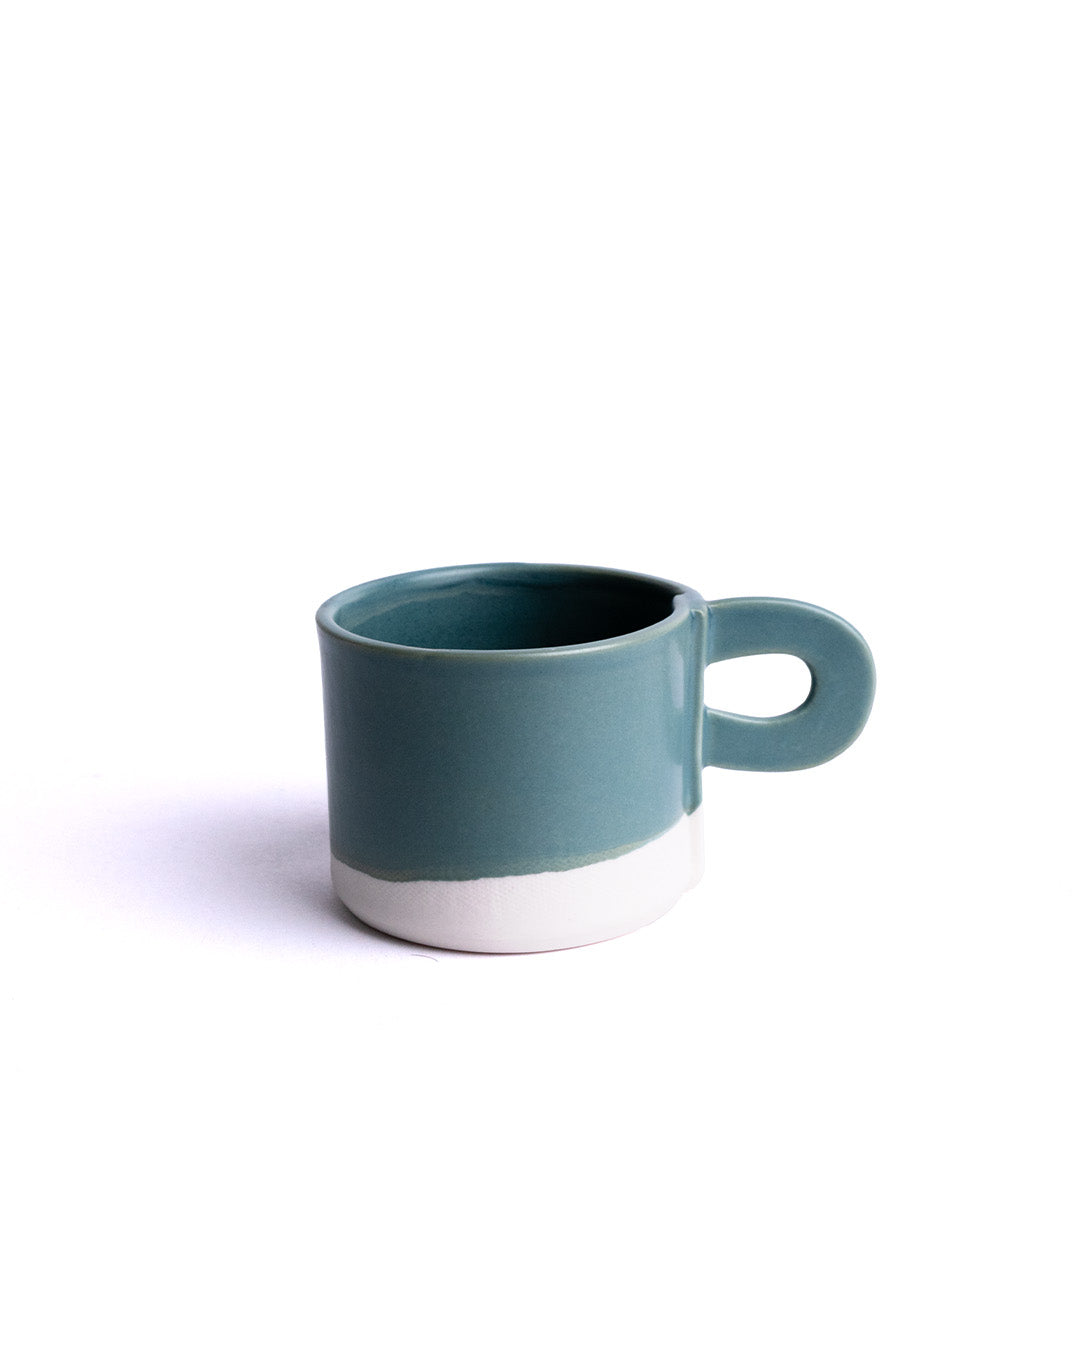 Overlapping Espresso Cups MIX - Set of 4 (-26%)